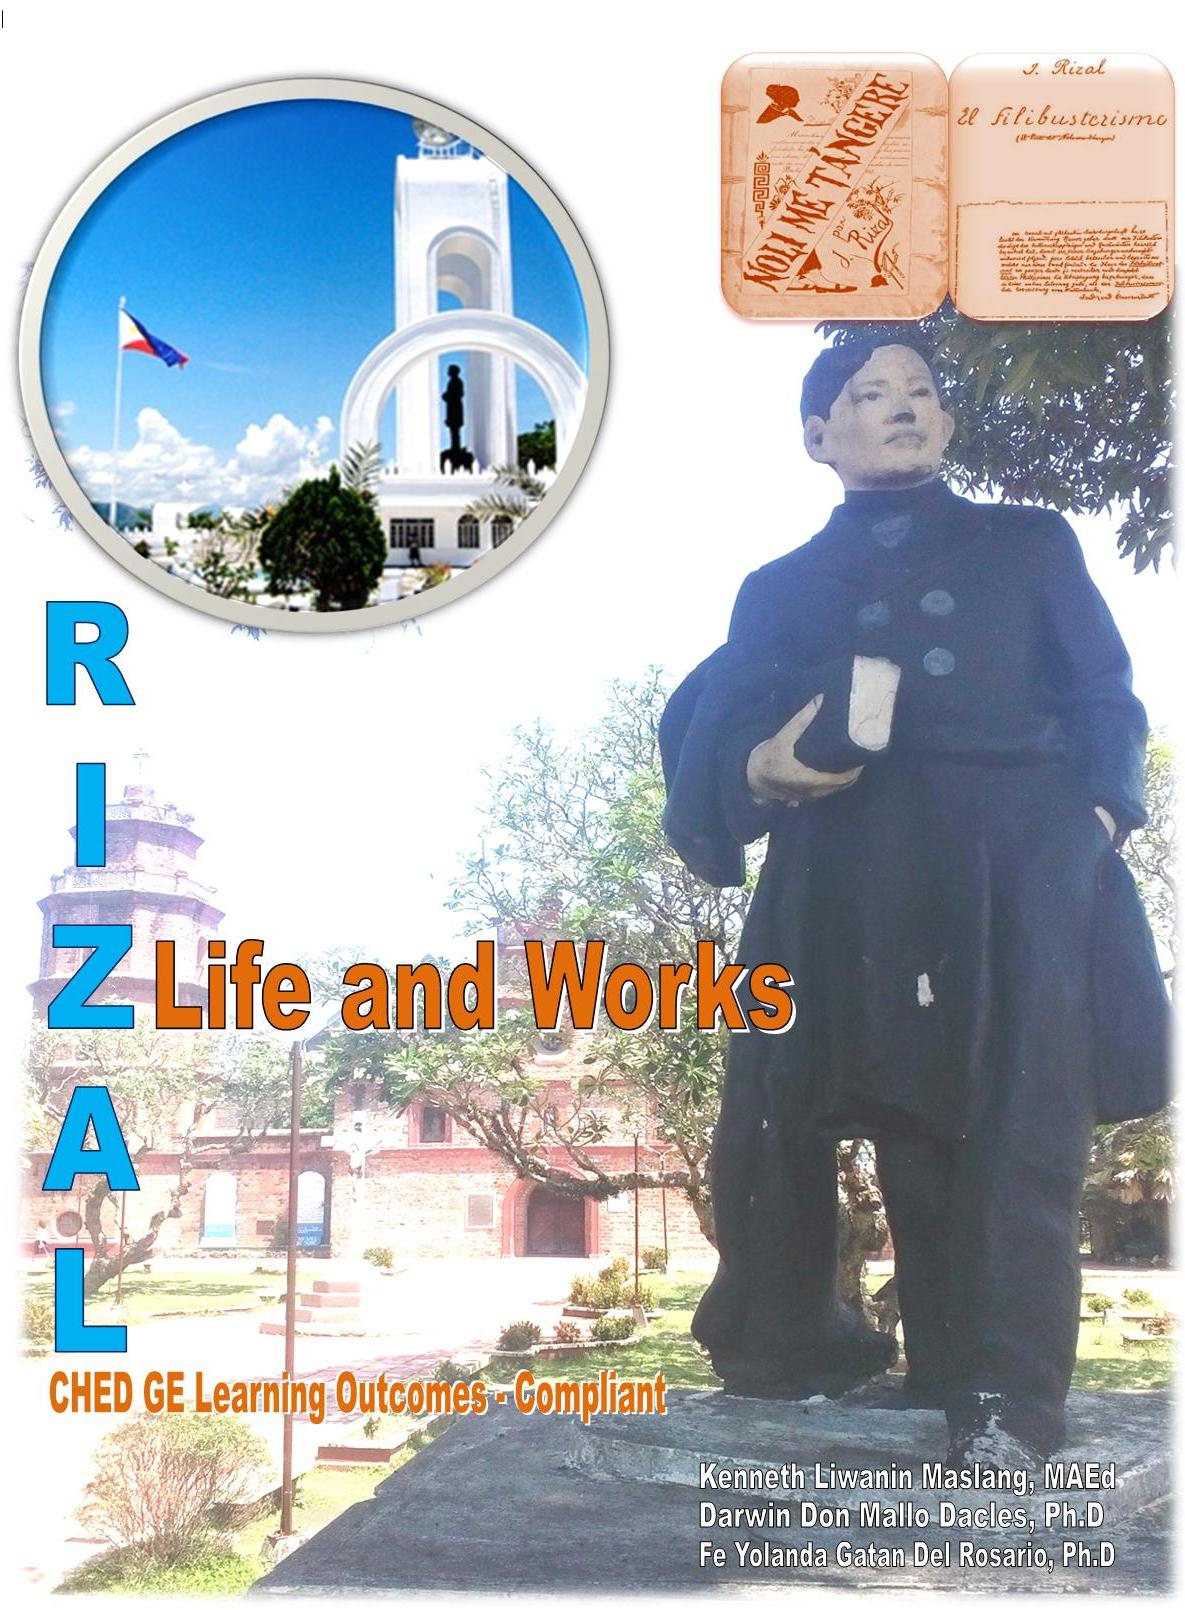 Rizal's Life and Works (4013)